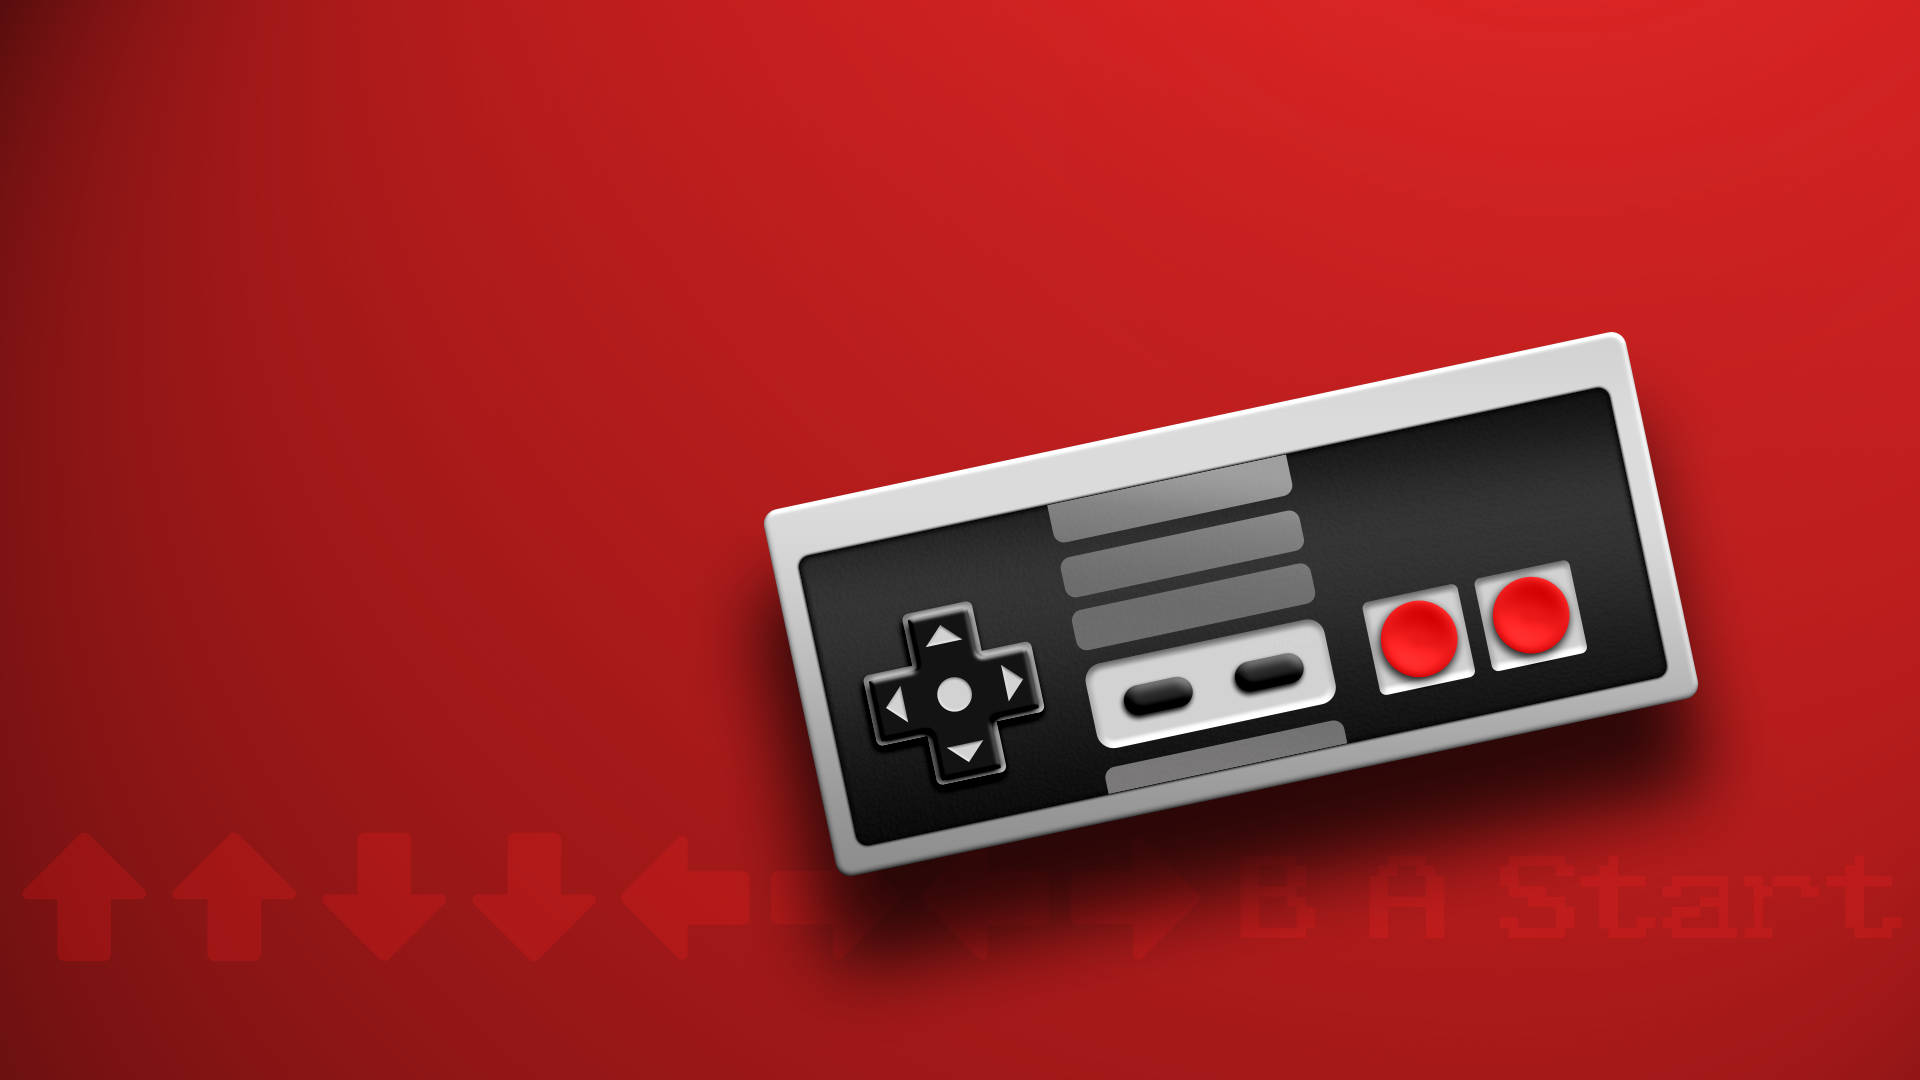 Nes Controller In Red